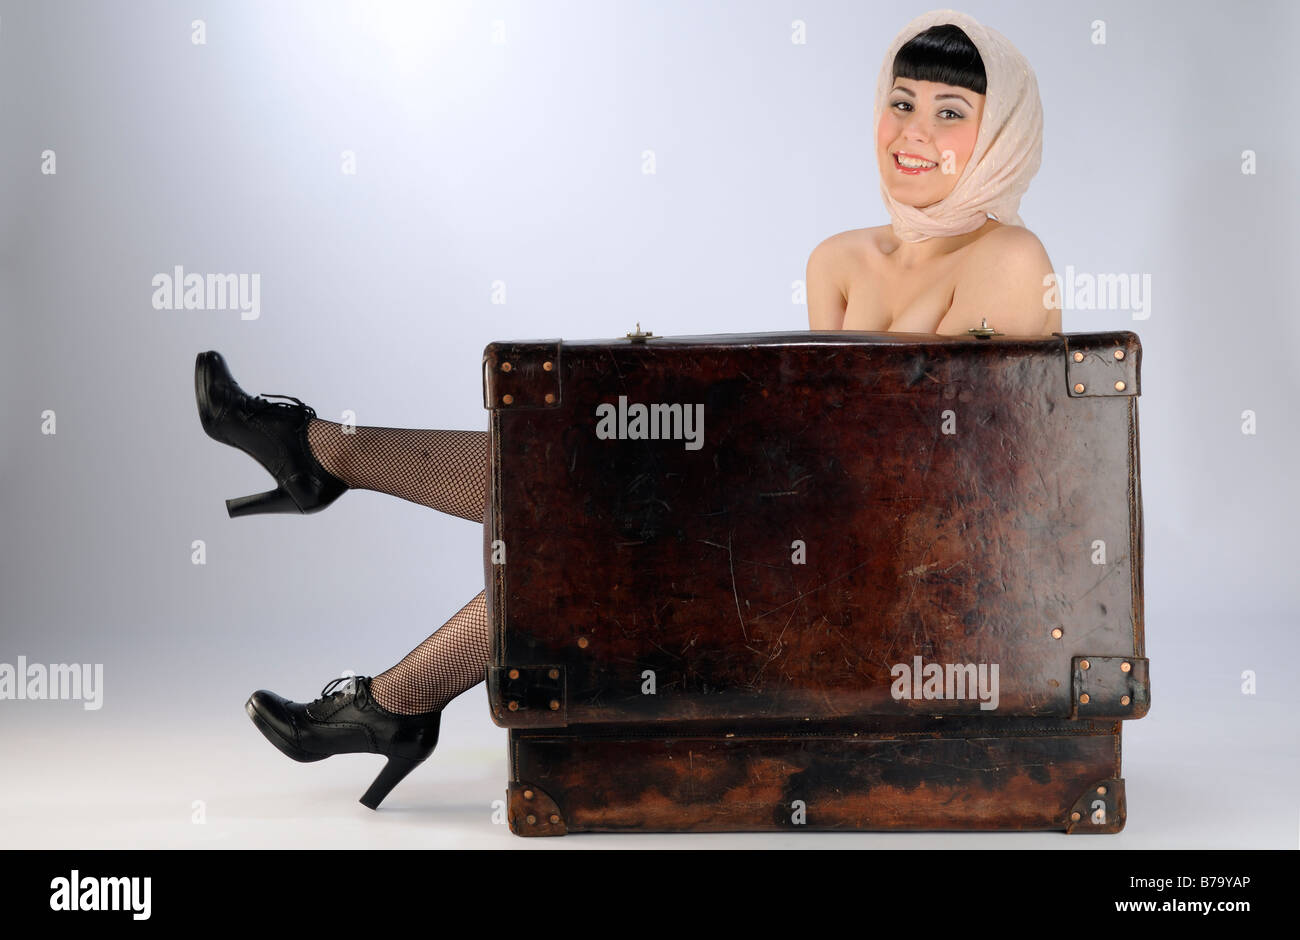 Funny image of a beautiful woman hide inside a leather suitcase Stock Photo